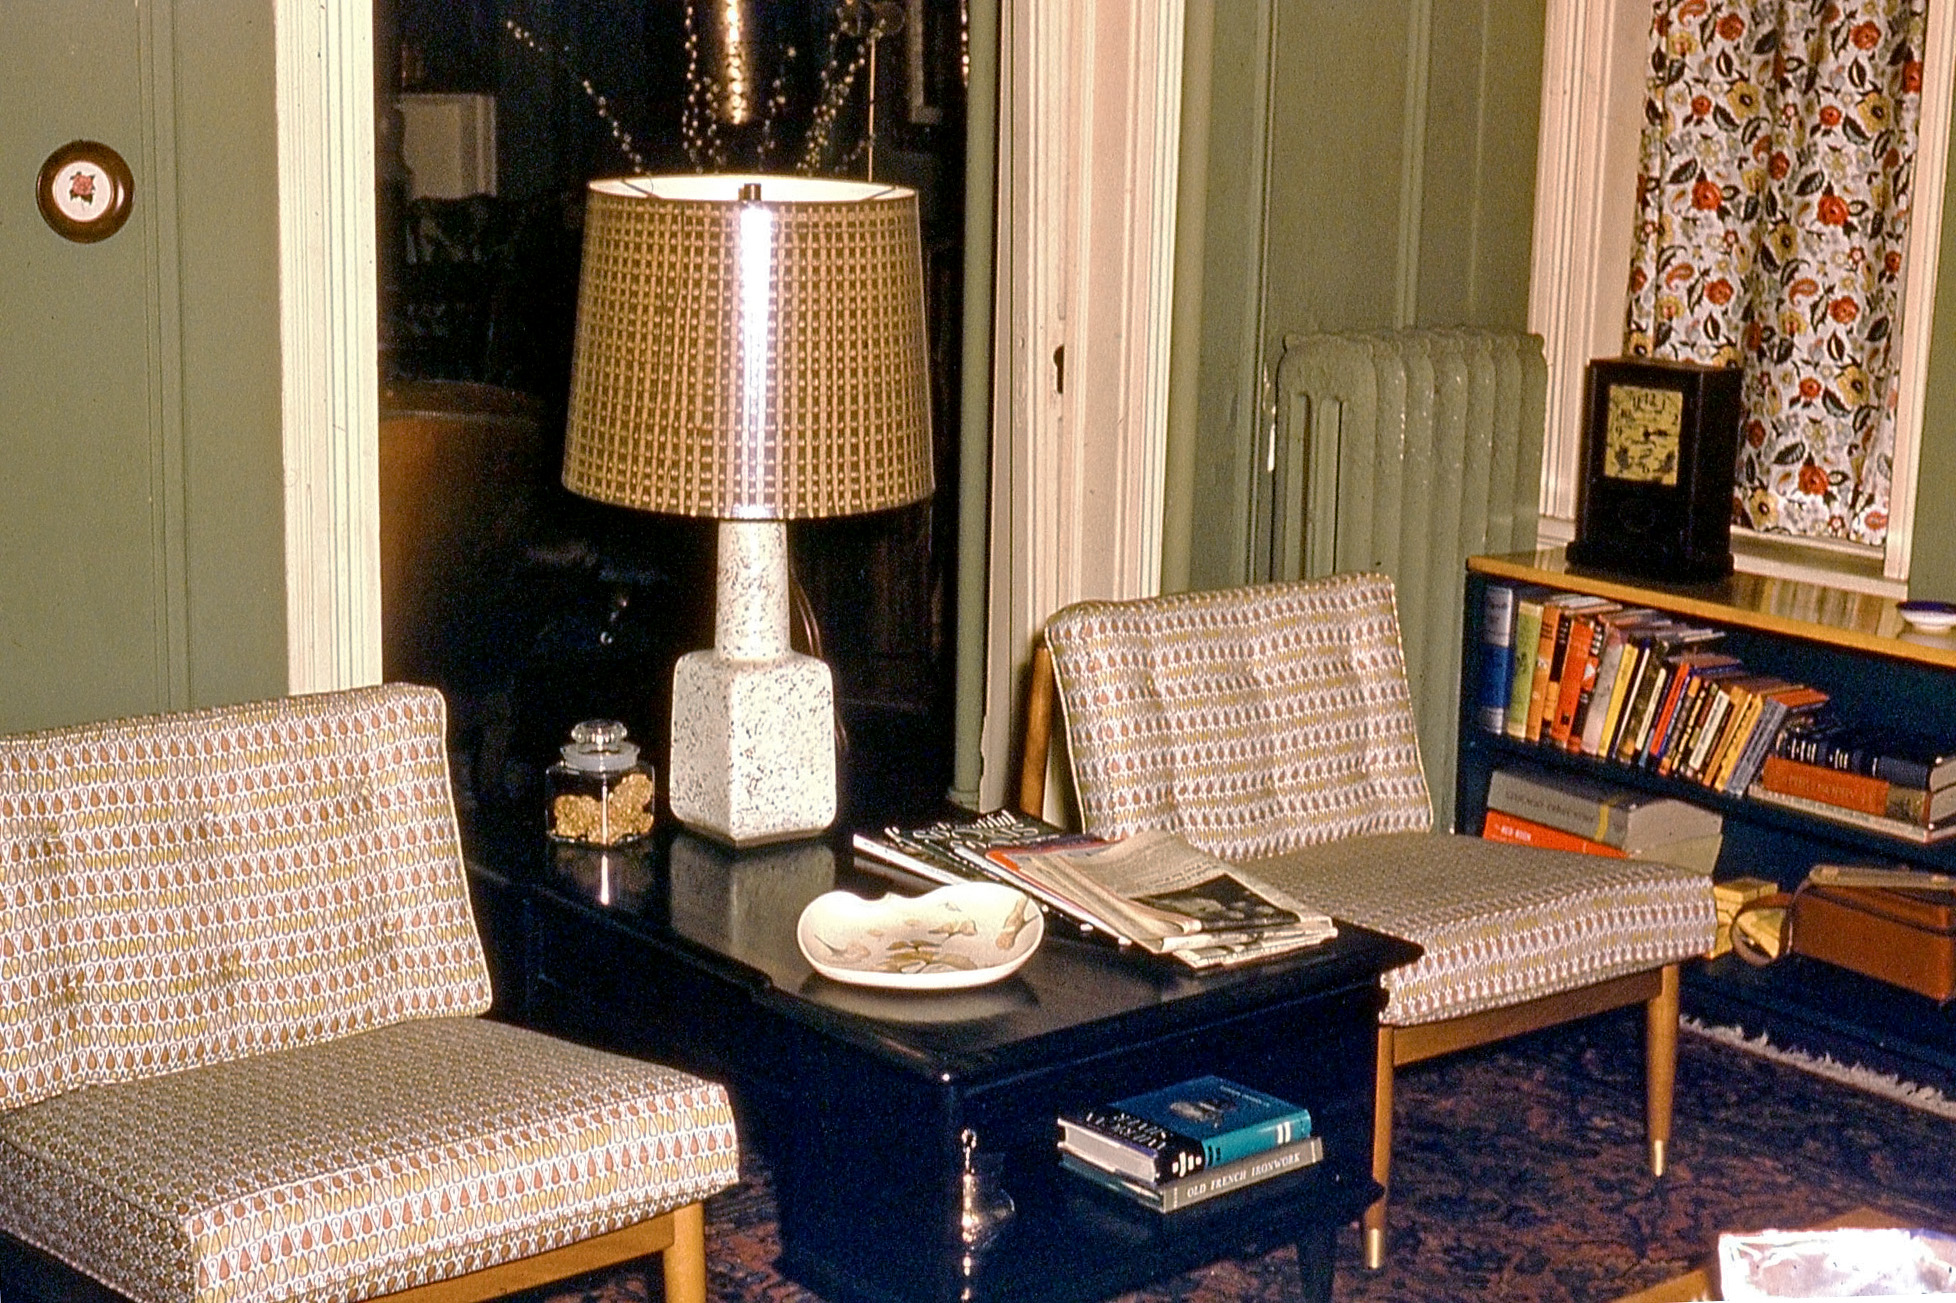 An unmarked Kodachrome slide brings this interior of a 1950s home with a mixture of old and new. I'll take the chairs, lamp and bookshelf. Of particular interest to me are the yellow Kodak boxes and camera case on the lower shelf to the right - possibly some of the very same boxes that I'm working with right now? View full size.